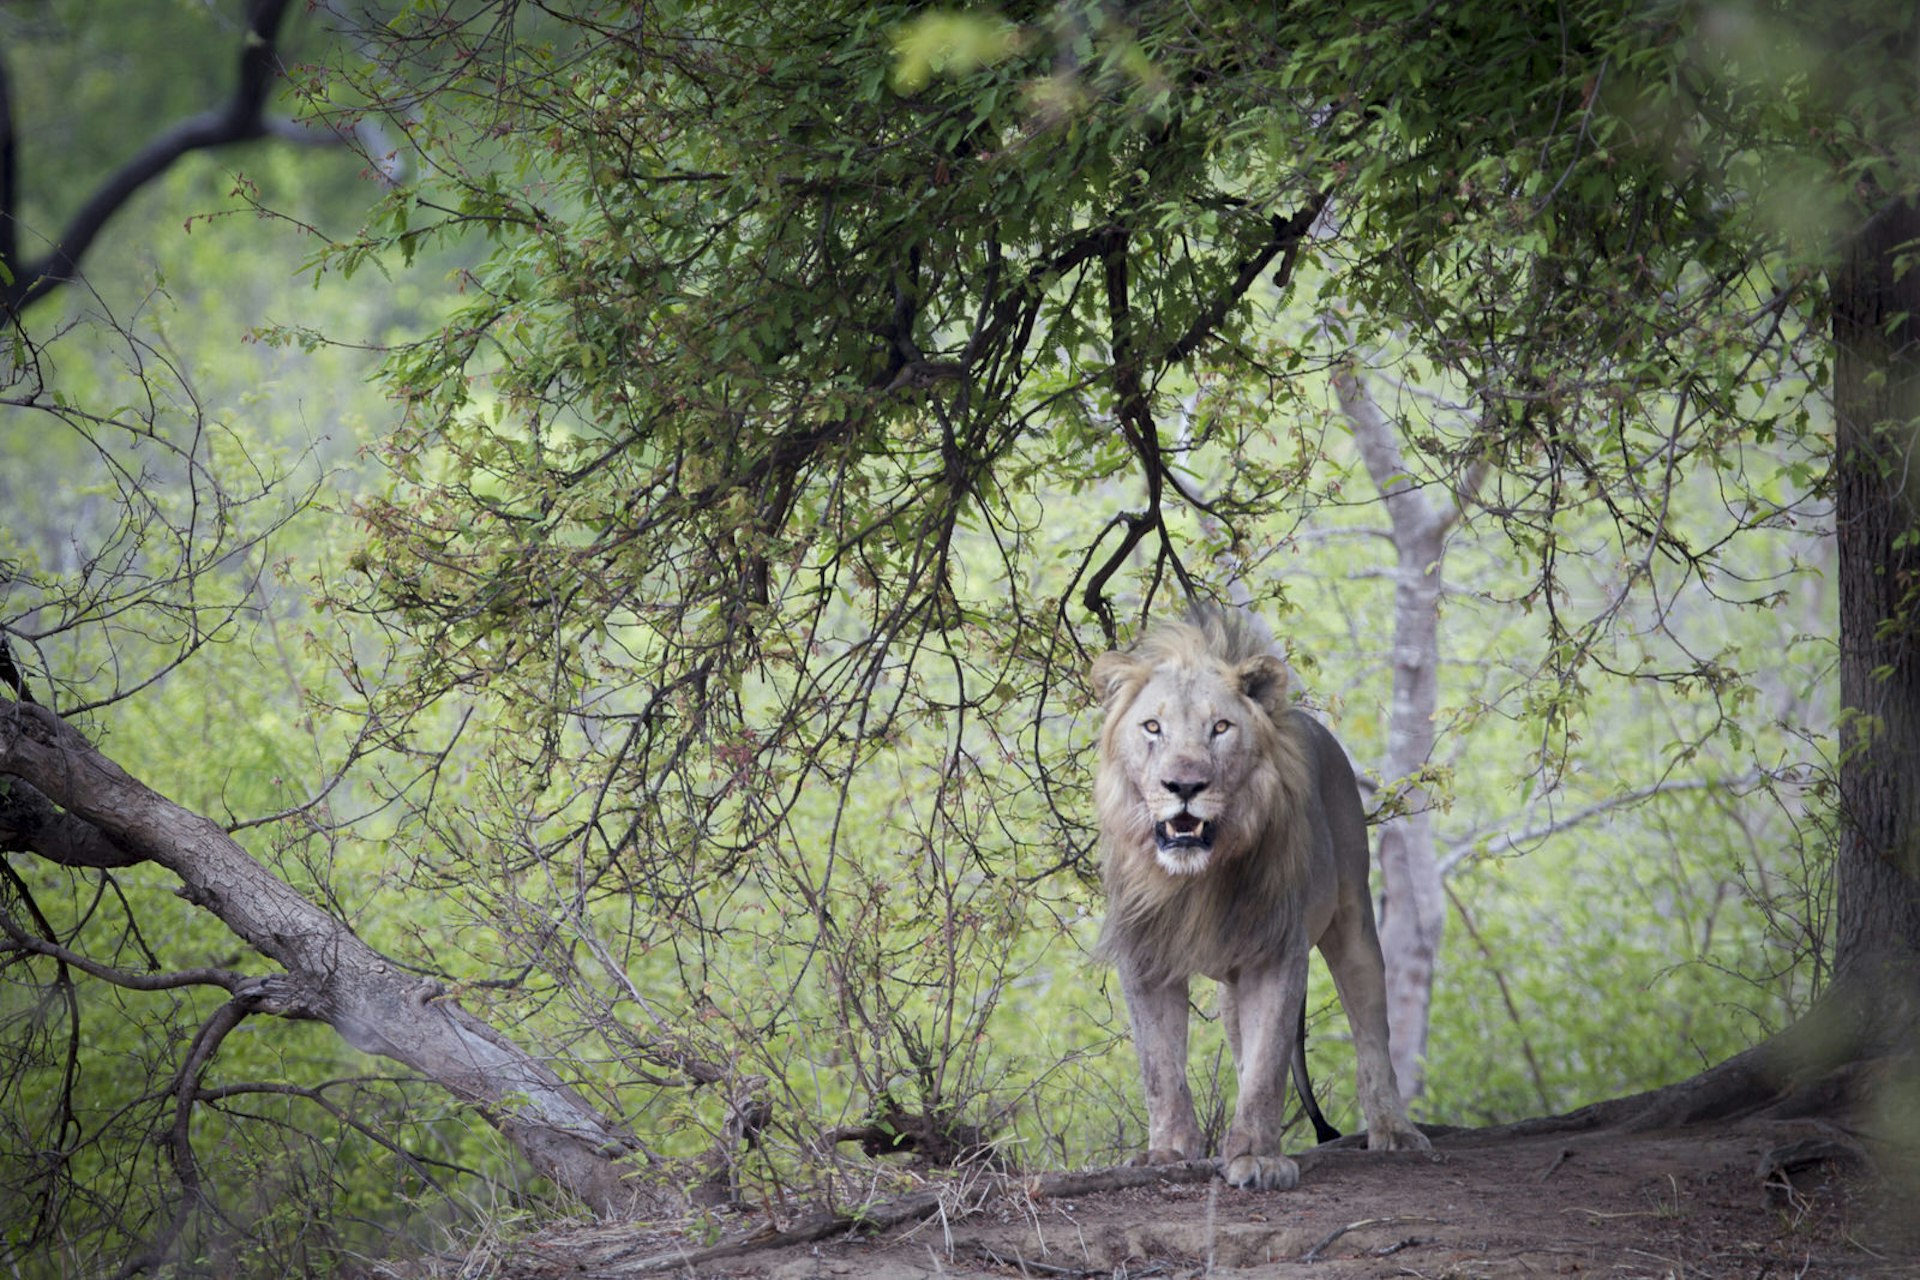 A lone male lion standing next to a tree within Majete Wildlife Reserve, Malawi